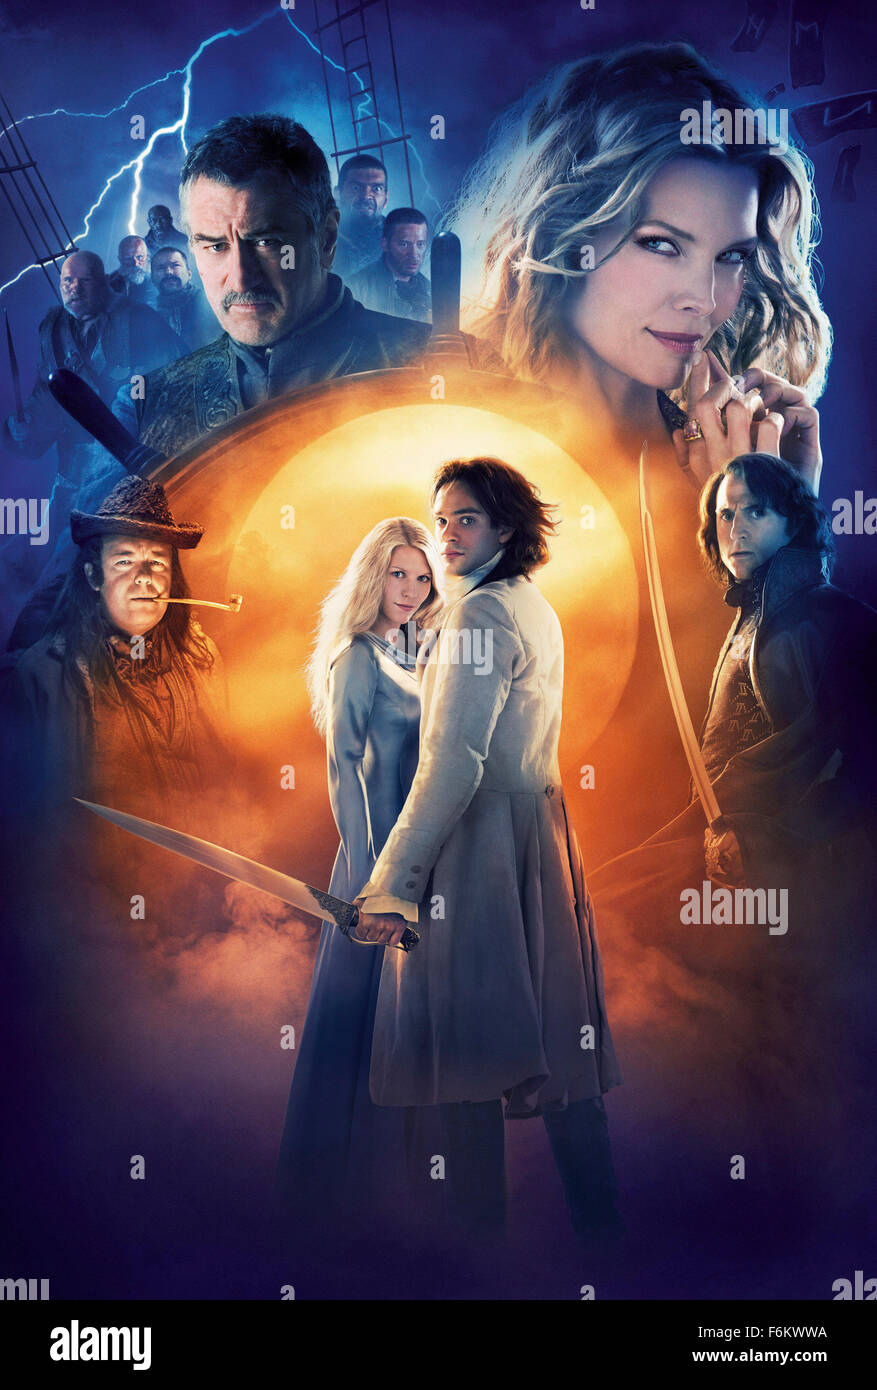 RELEASE DATE: 10 August 2007. MOVIE TITLE: Stardust. STUDIO: Paramount Pictures. PLOT: In a countryside town bordering on a magical land, a young man makes a promise to his beloved that he'll retrieve a fallen star by venturing into the magical realm. PICTURED: Movie Poster. Stock Photo